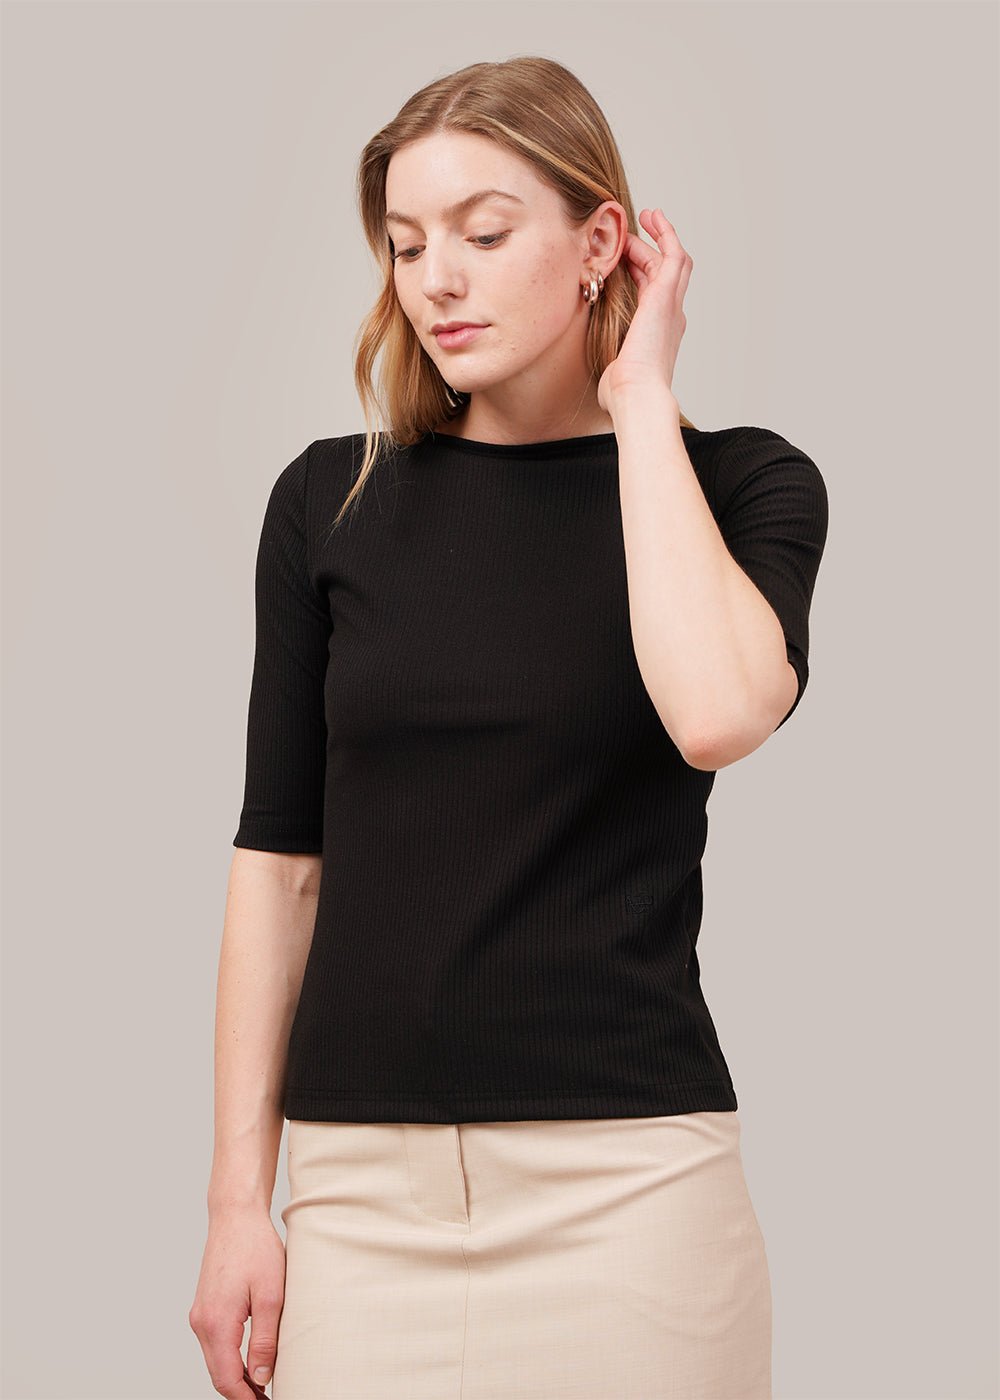 Mijeong Park Black Scoop Back Ribbed Top - New Classics Studios Sustainable Ethical Fashion Canada